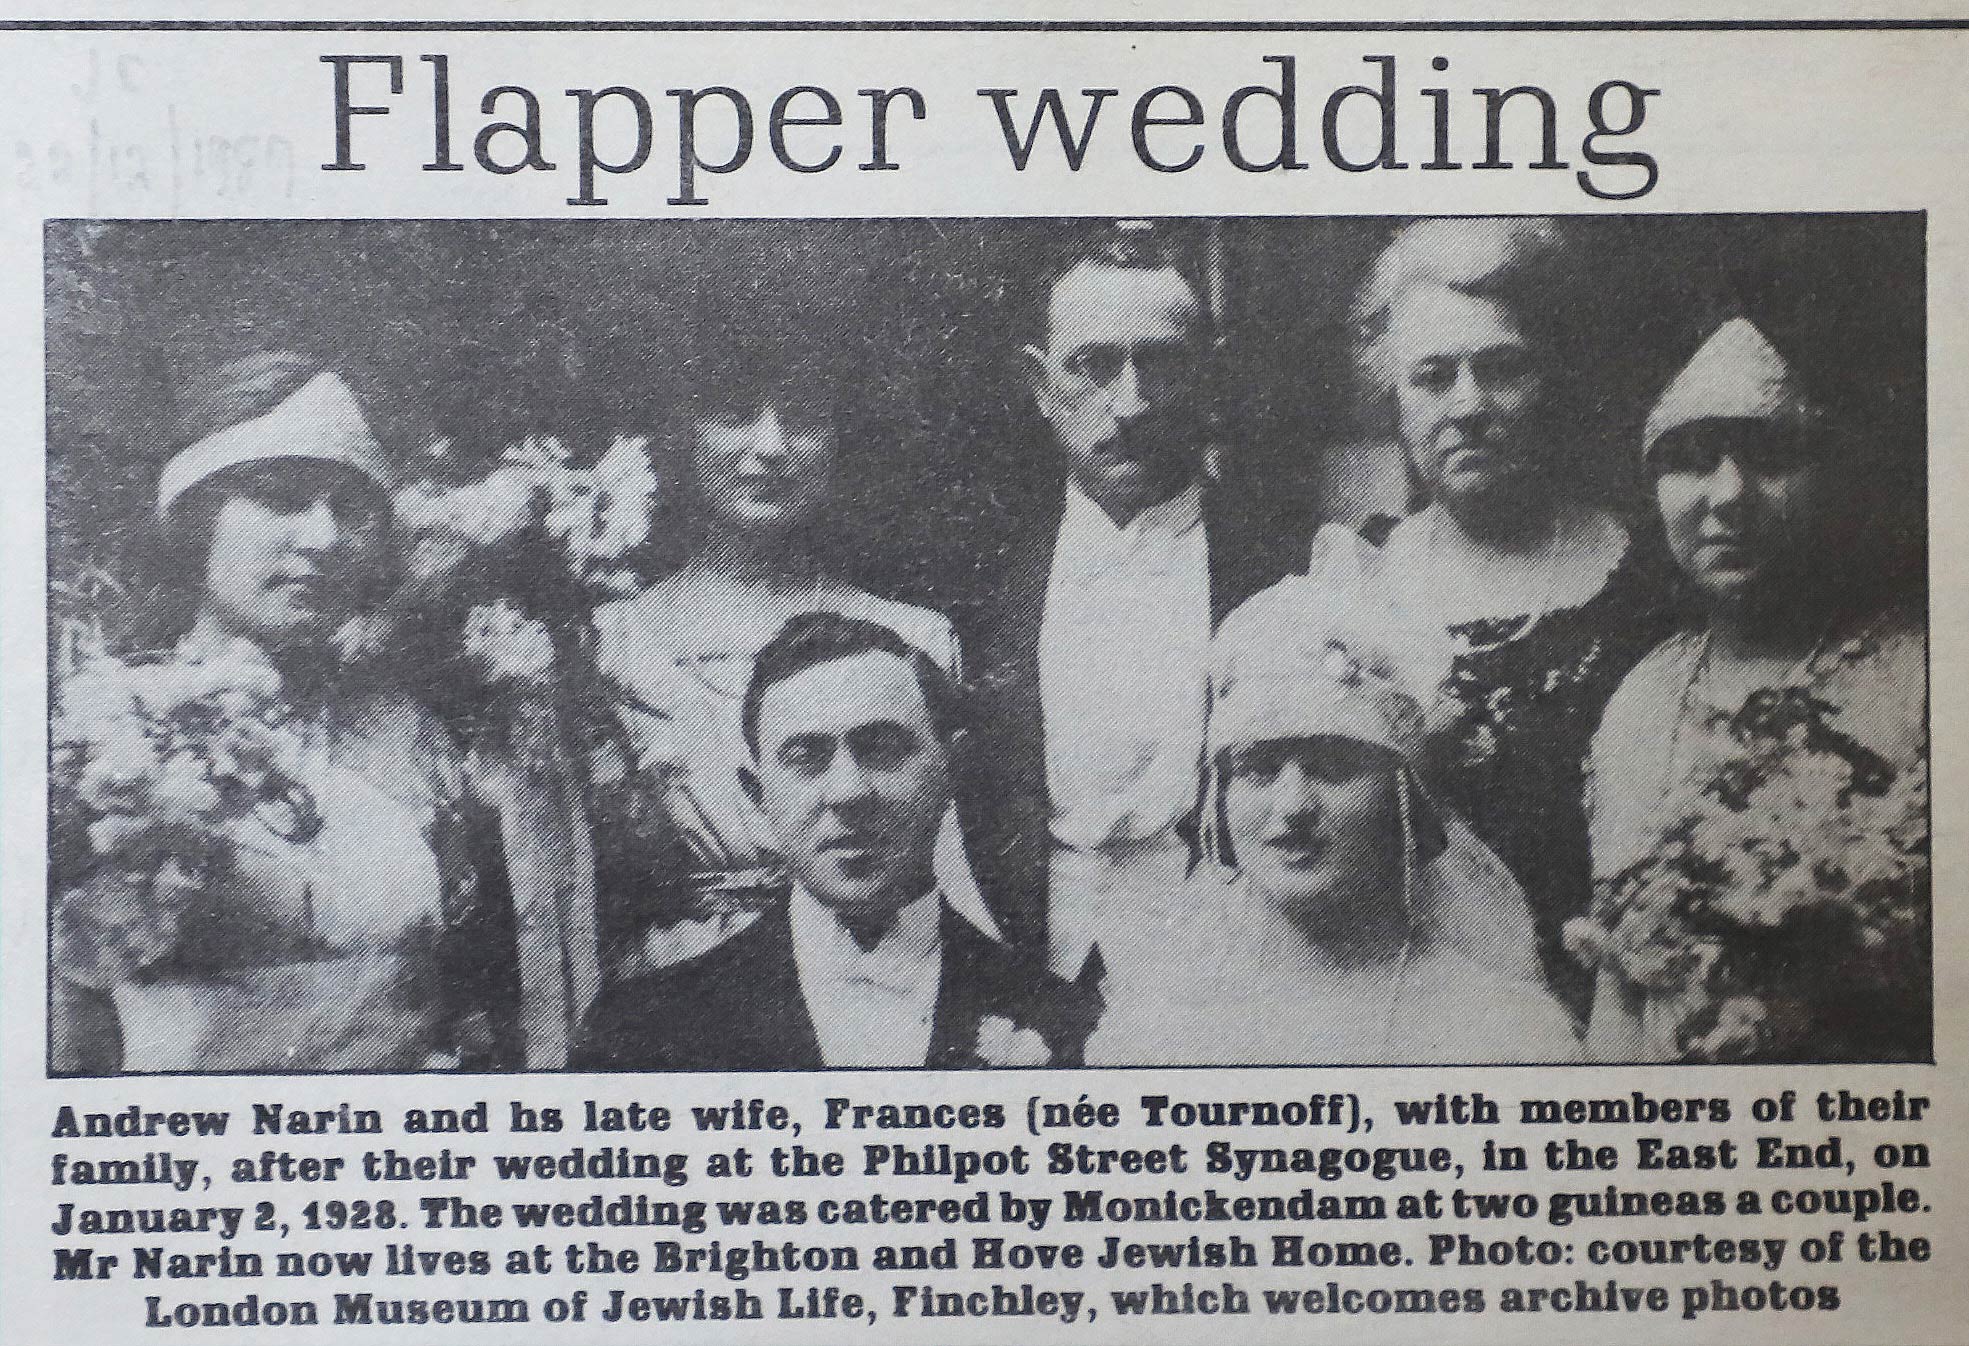 Photograph of flapper wedding in 1928